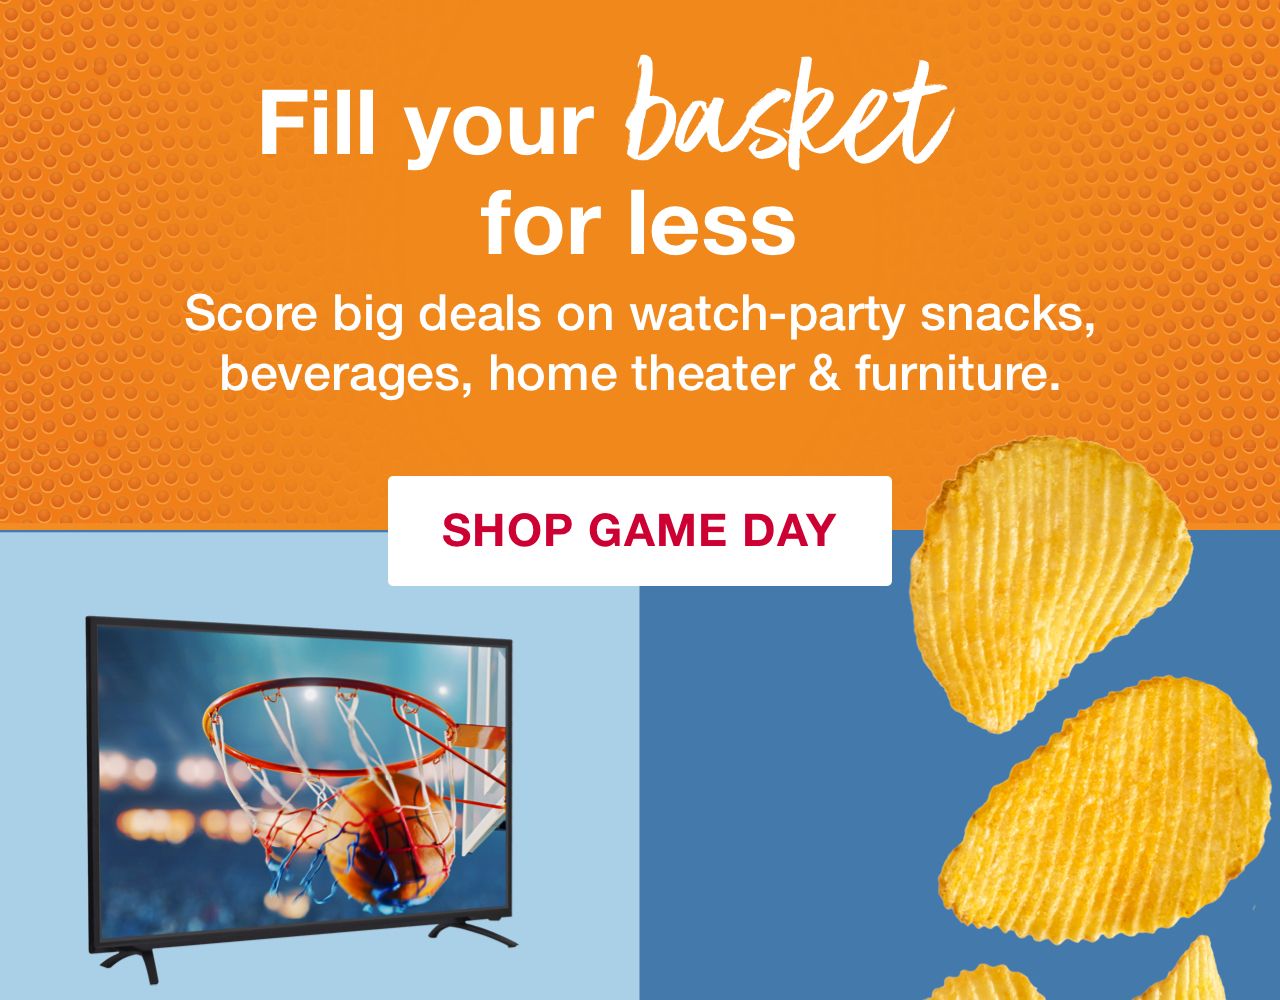 Fill your basket for less. Score big deals on watch-party snacks, beverages, home theater & furniture. Click here to shop game day. 